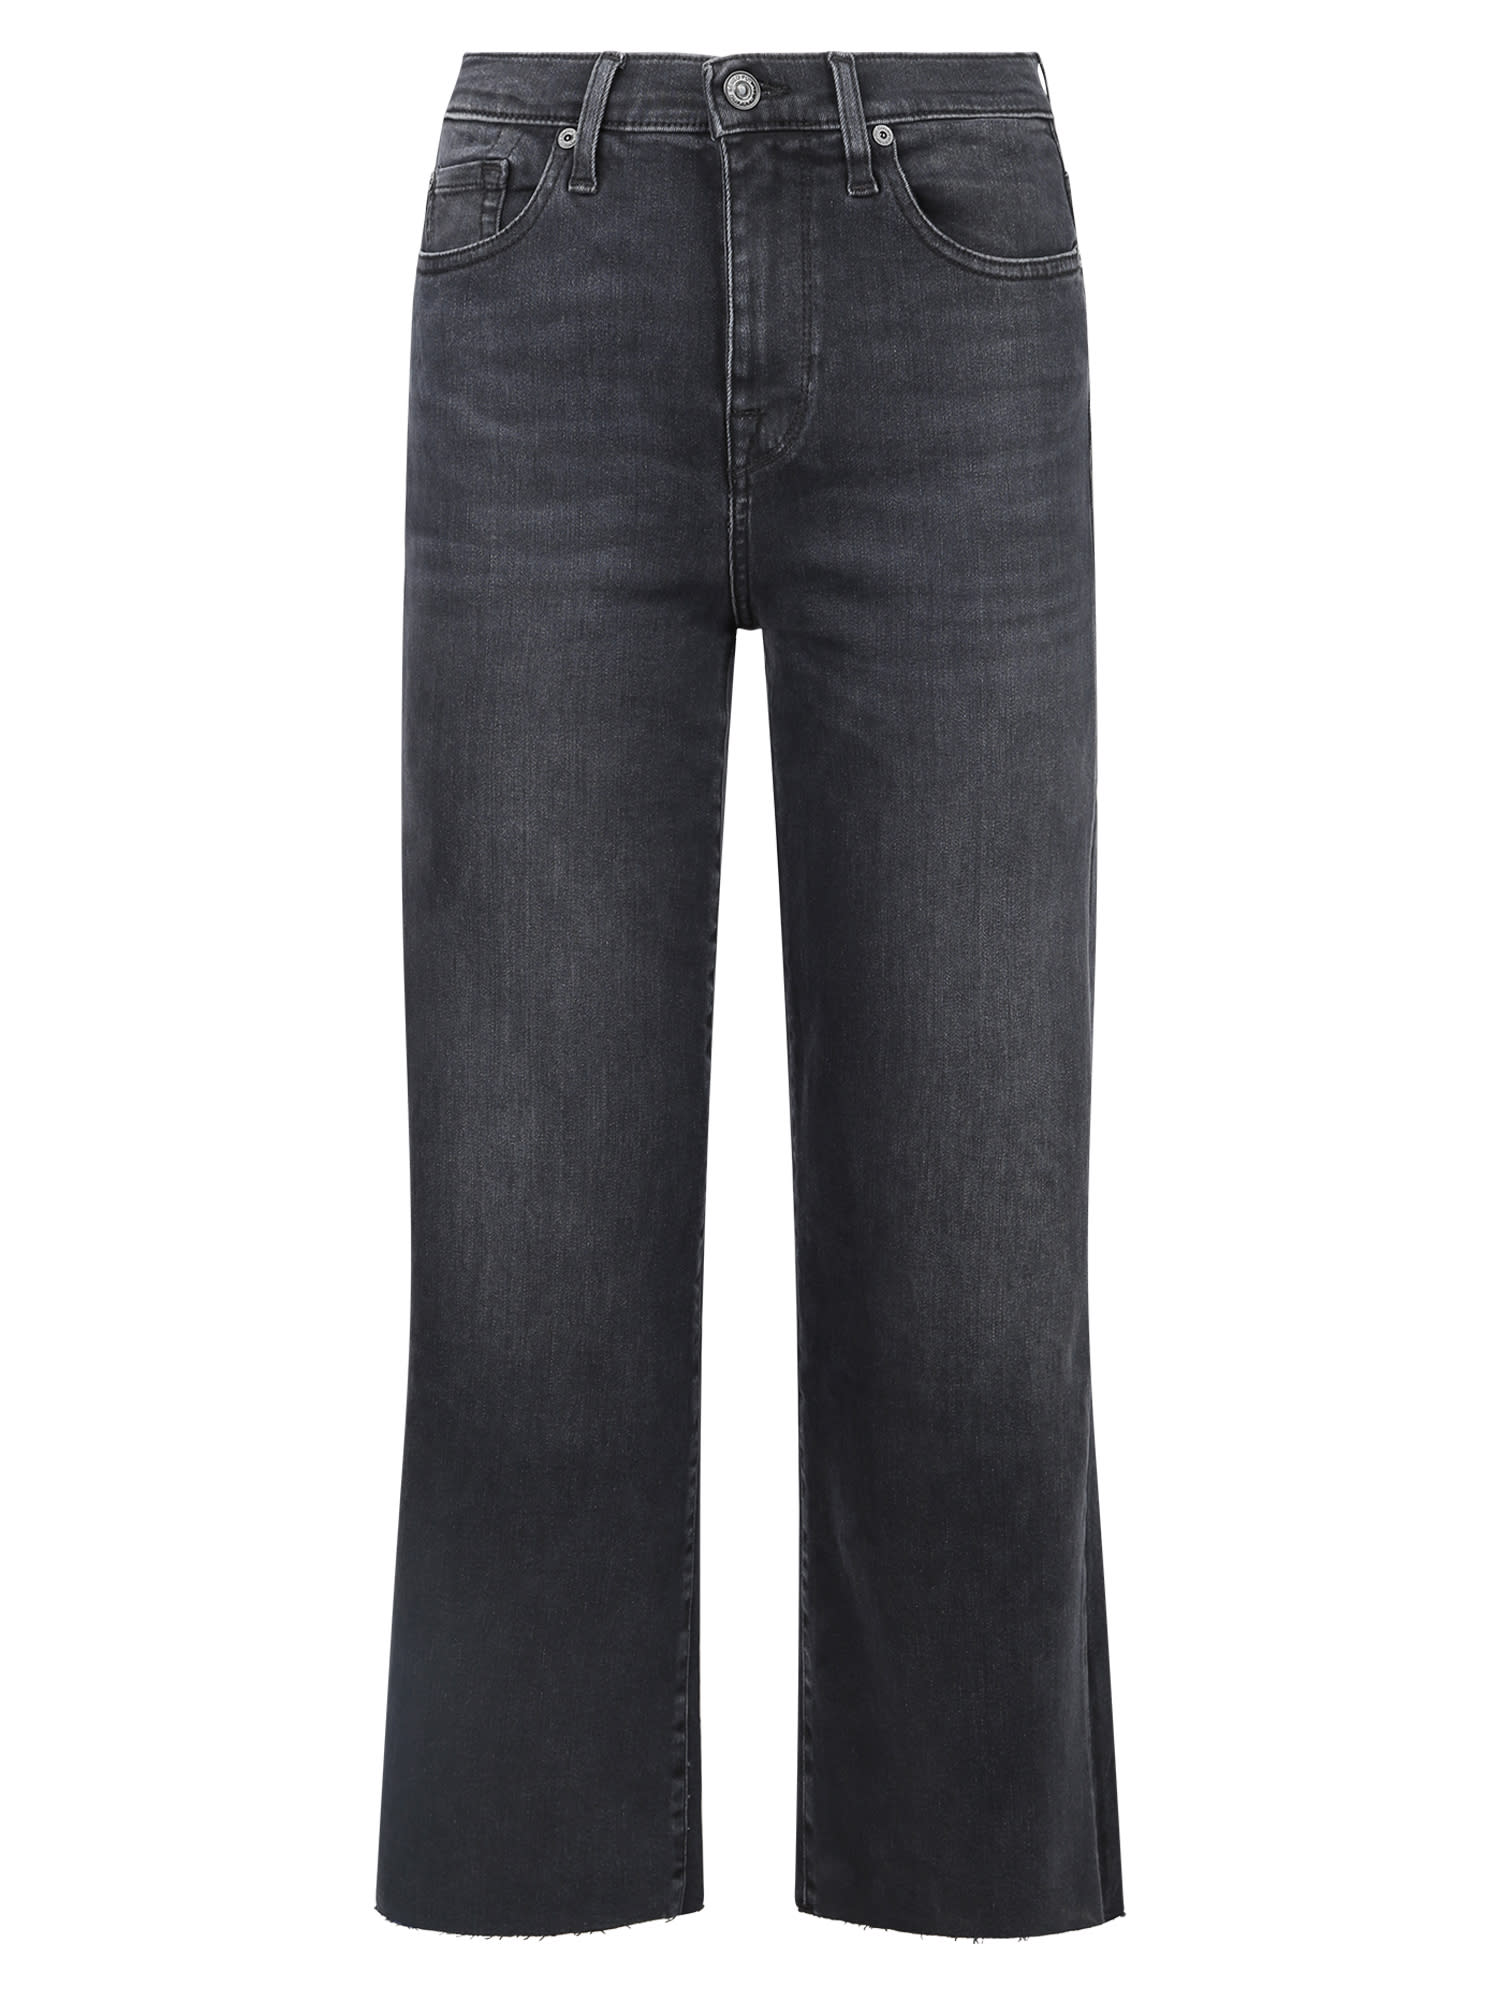 7 For All Mankind Alexa Jeans